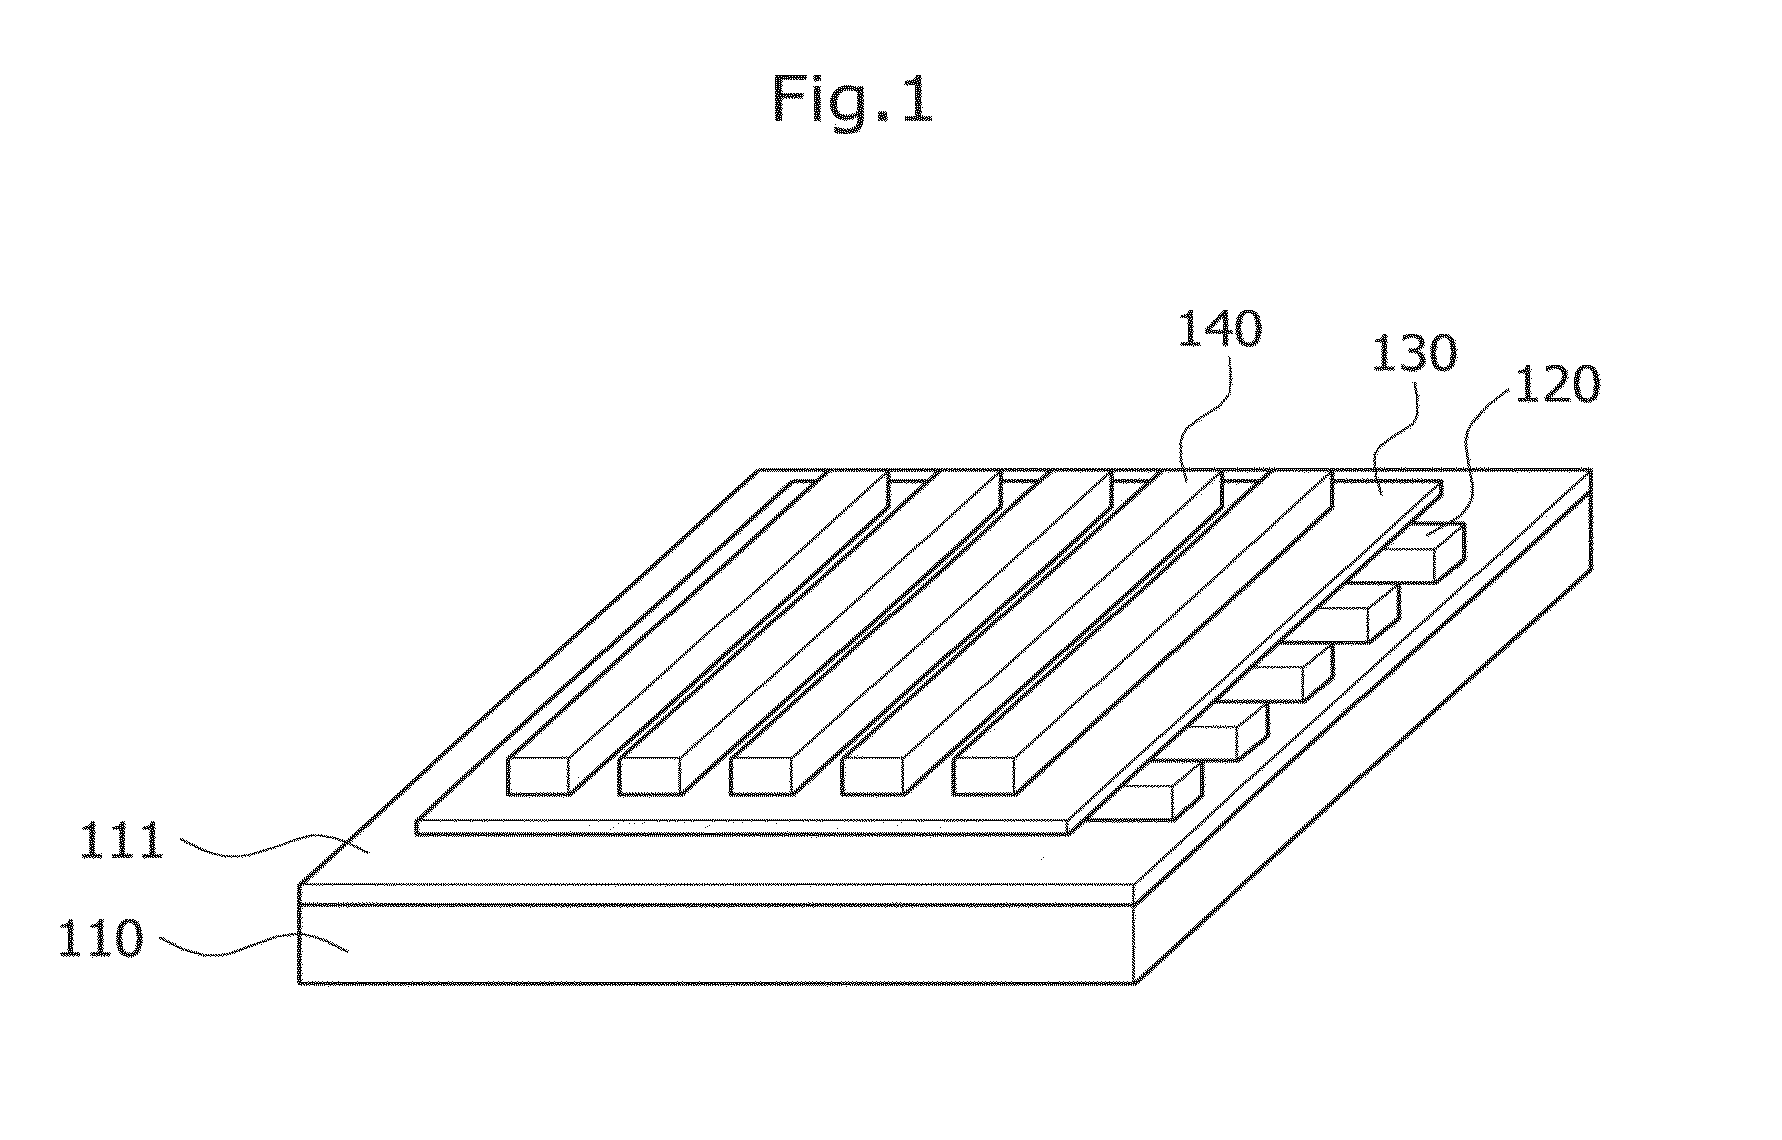 Graphene oxide memory devices and method of fabricating the same